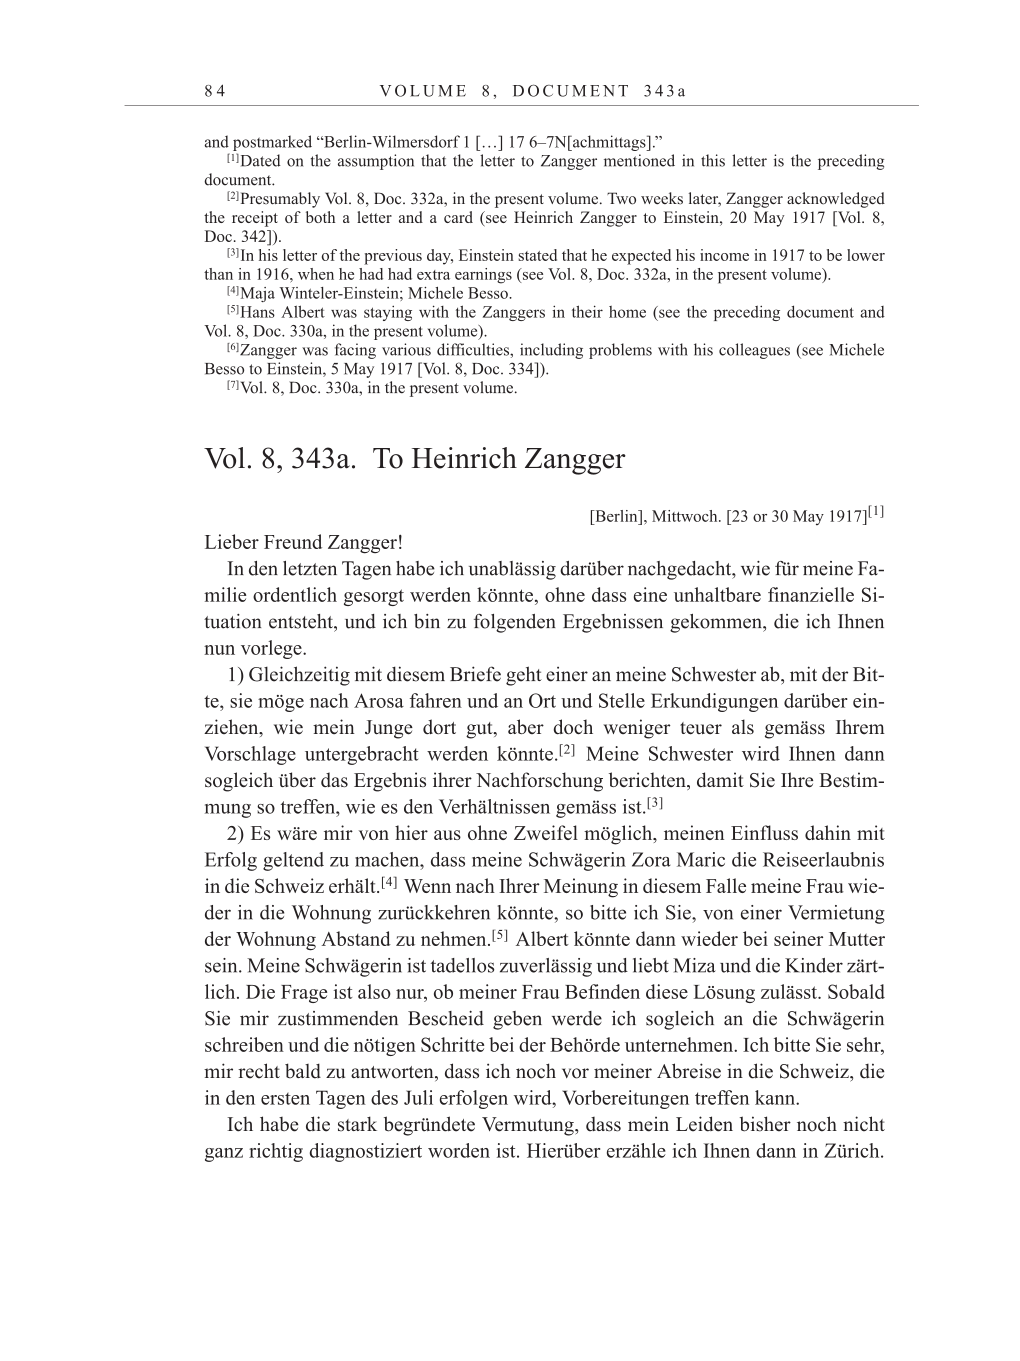 Volume 10: The Berlin Years: Correspondence May-December 1920 / Supplementary Correspondence 1909-1920 page 84